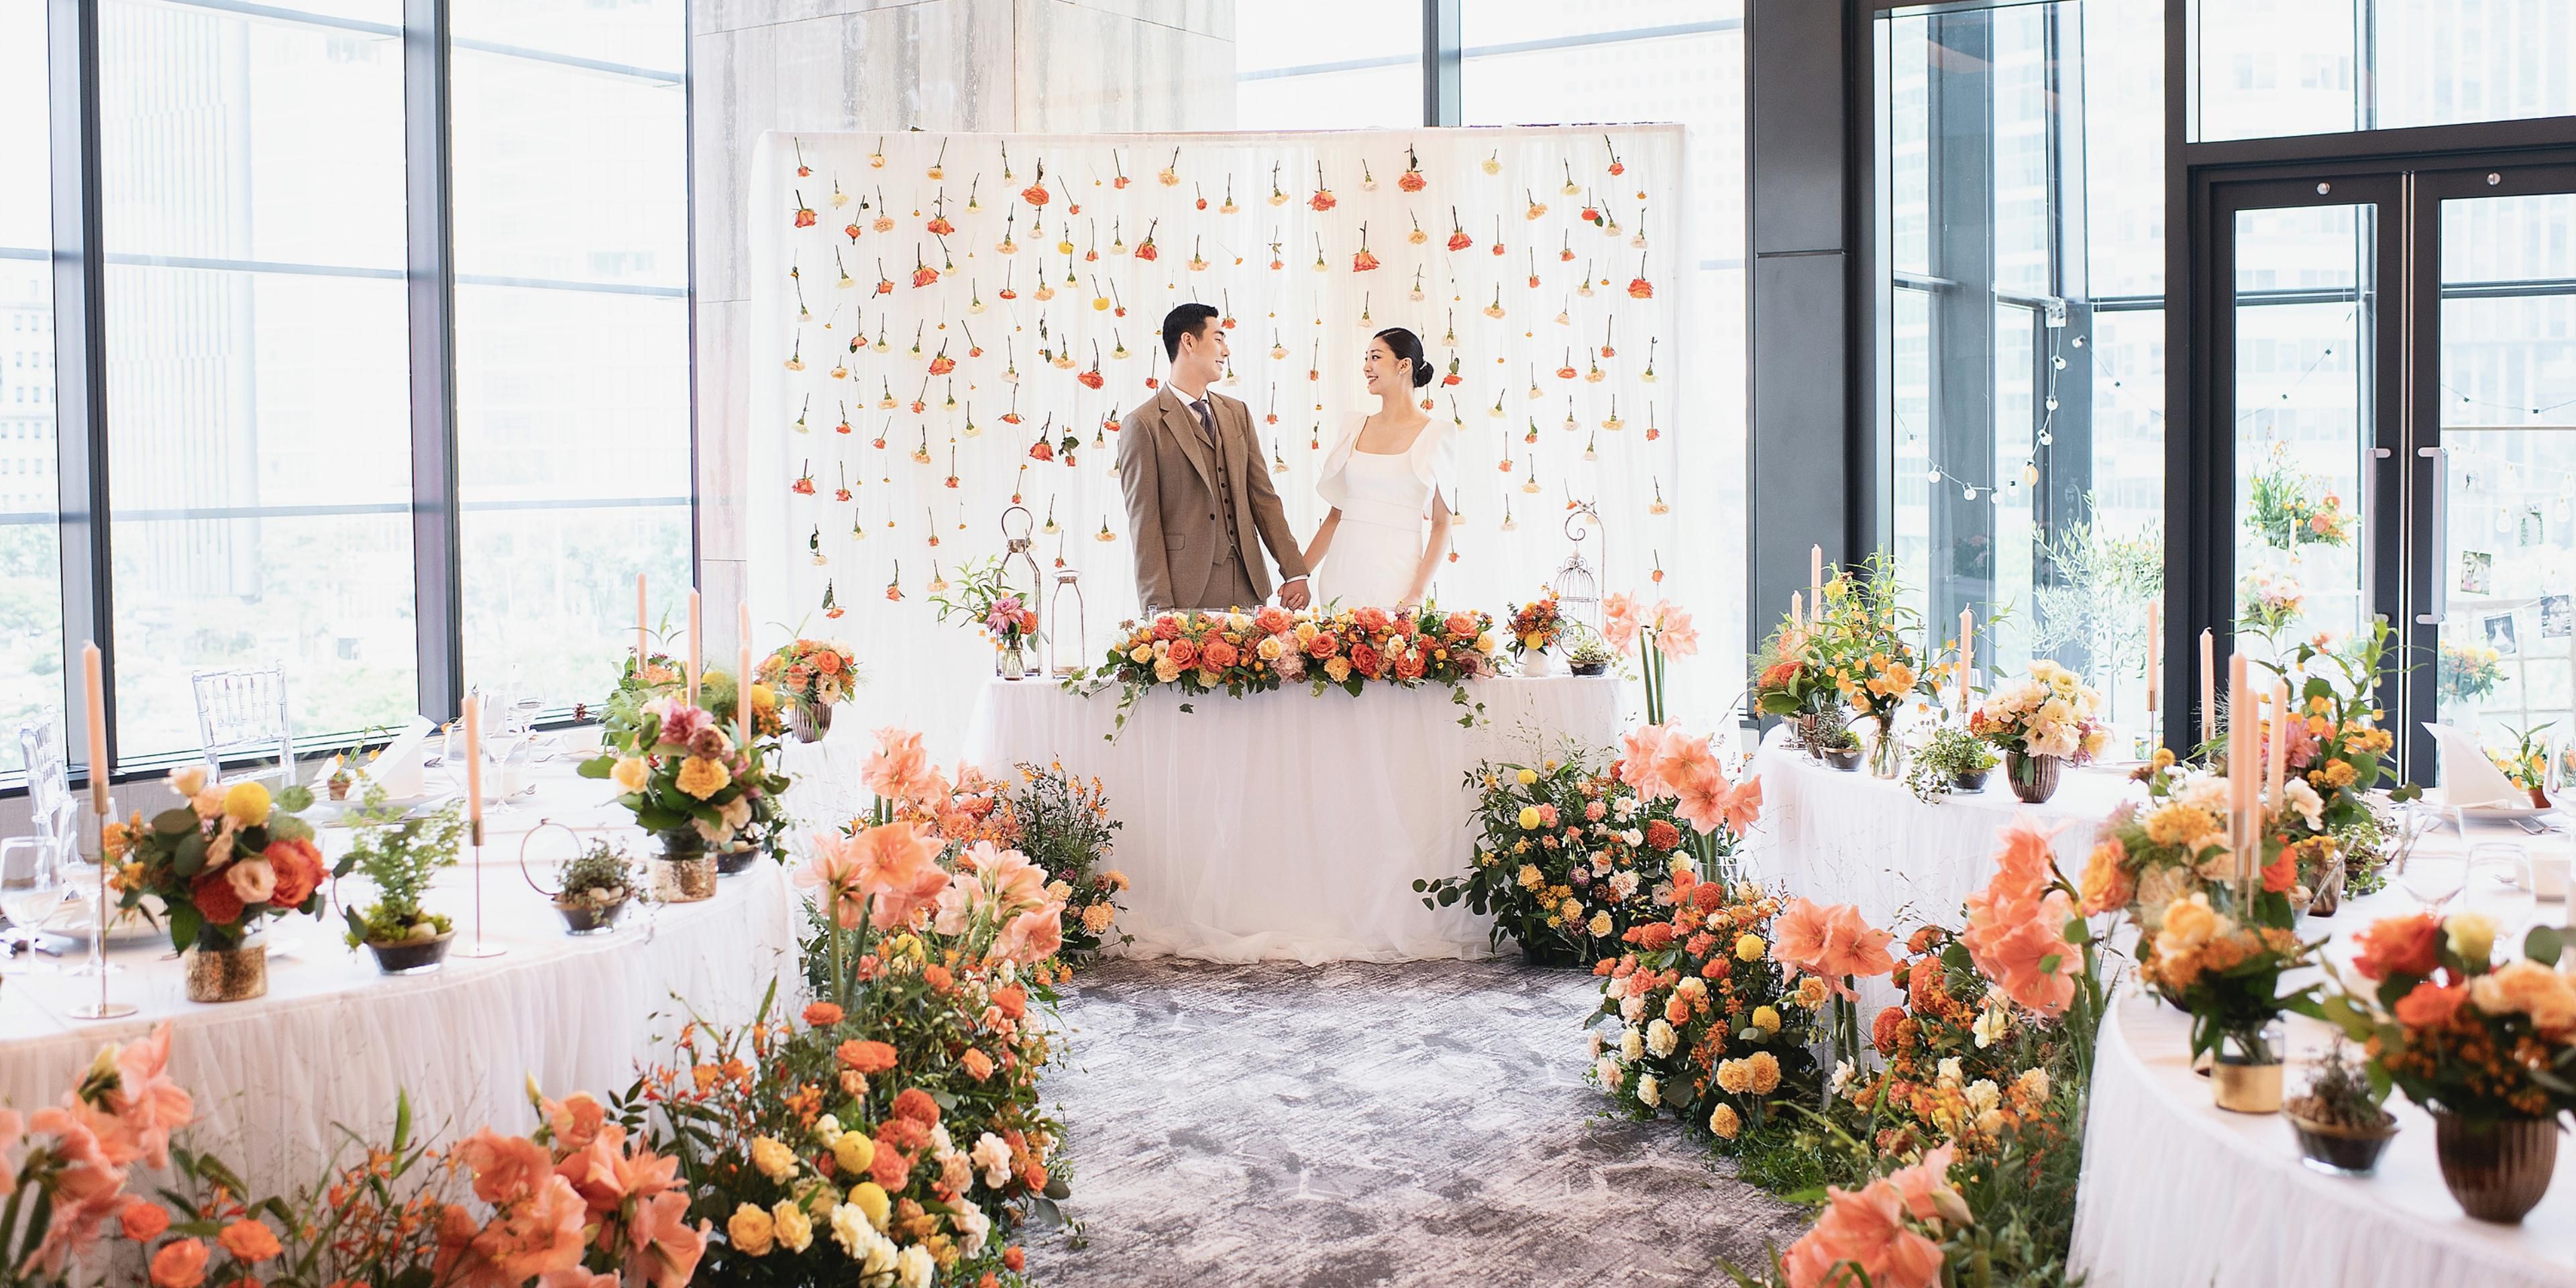 With various venues to accommodate weddings of all sizes, our hotel is the premier destination for sophisticated weddings. Let our events team make your dream day a reality with our exquisite quality and service of Grand InterContinental Seoul Parnas.